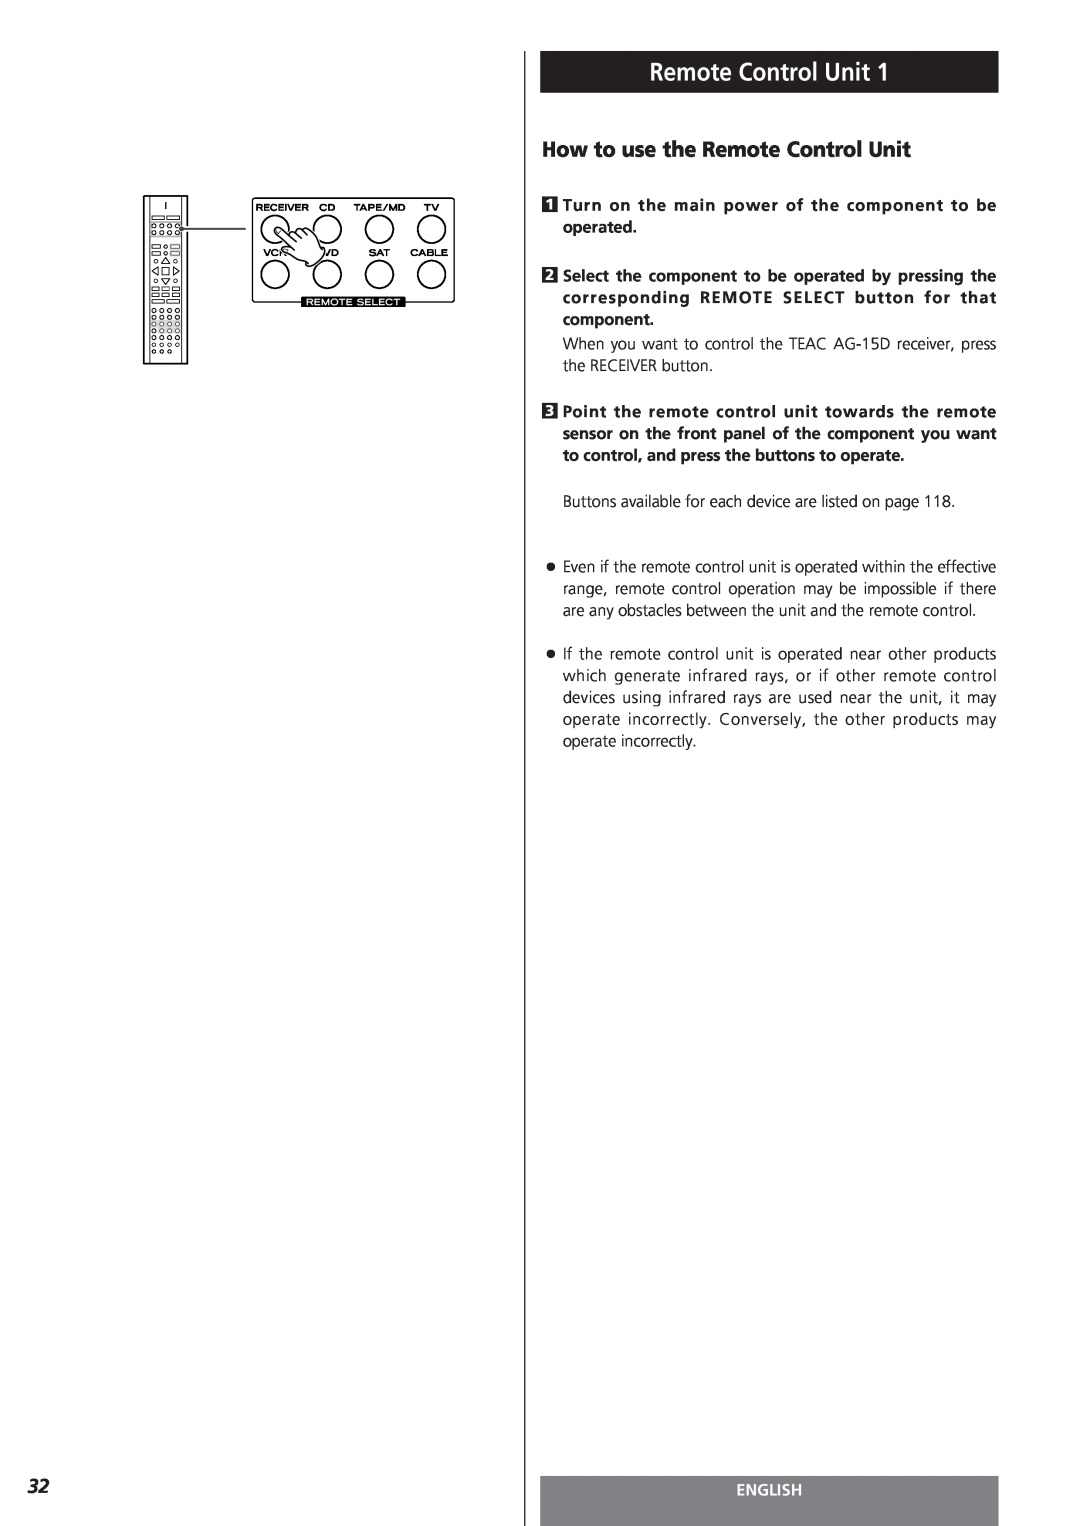 Teac AG-15D owner manual How to use the Remote Control Unit, English 